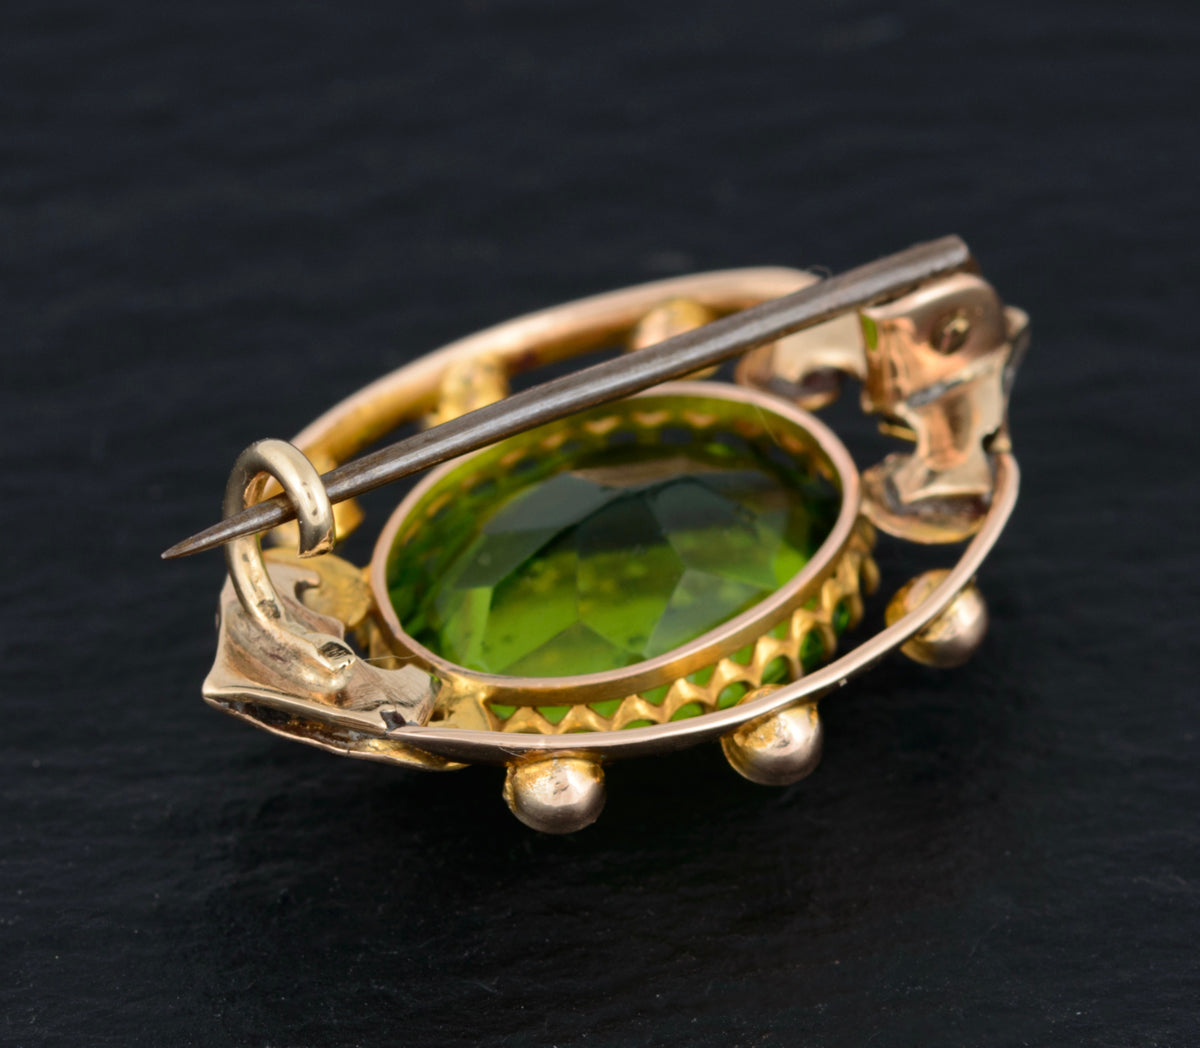 Antique Victorian 9ct Gold, Seed Pearl & Green Paste Gem Brooch/Pin (A1498)